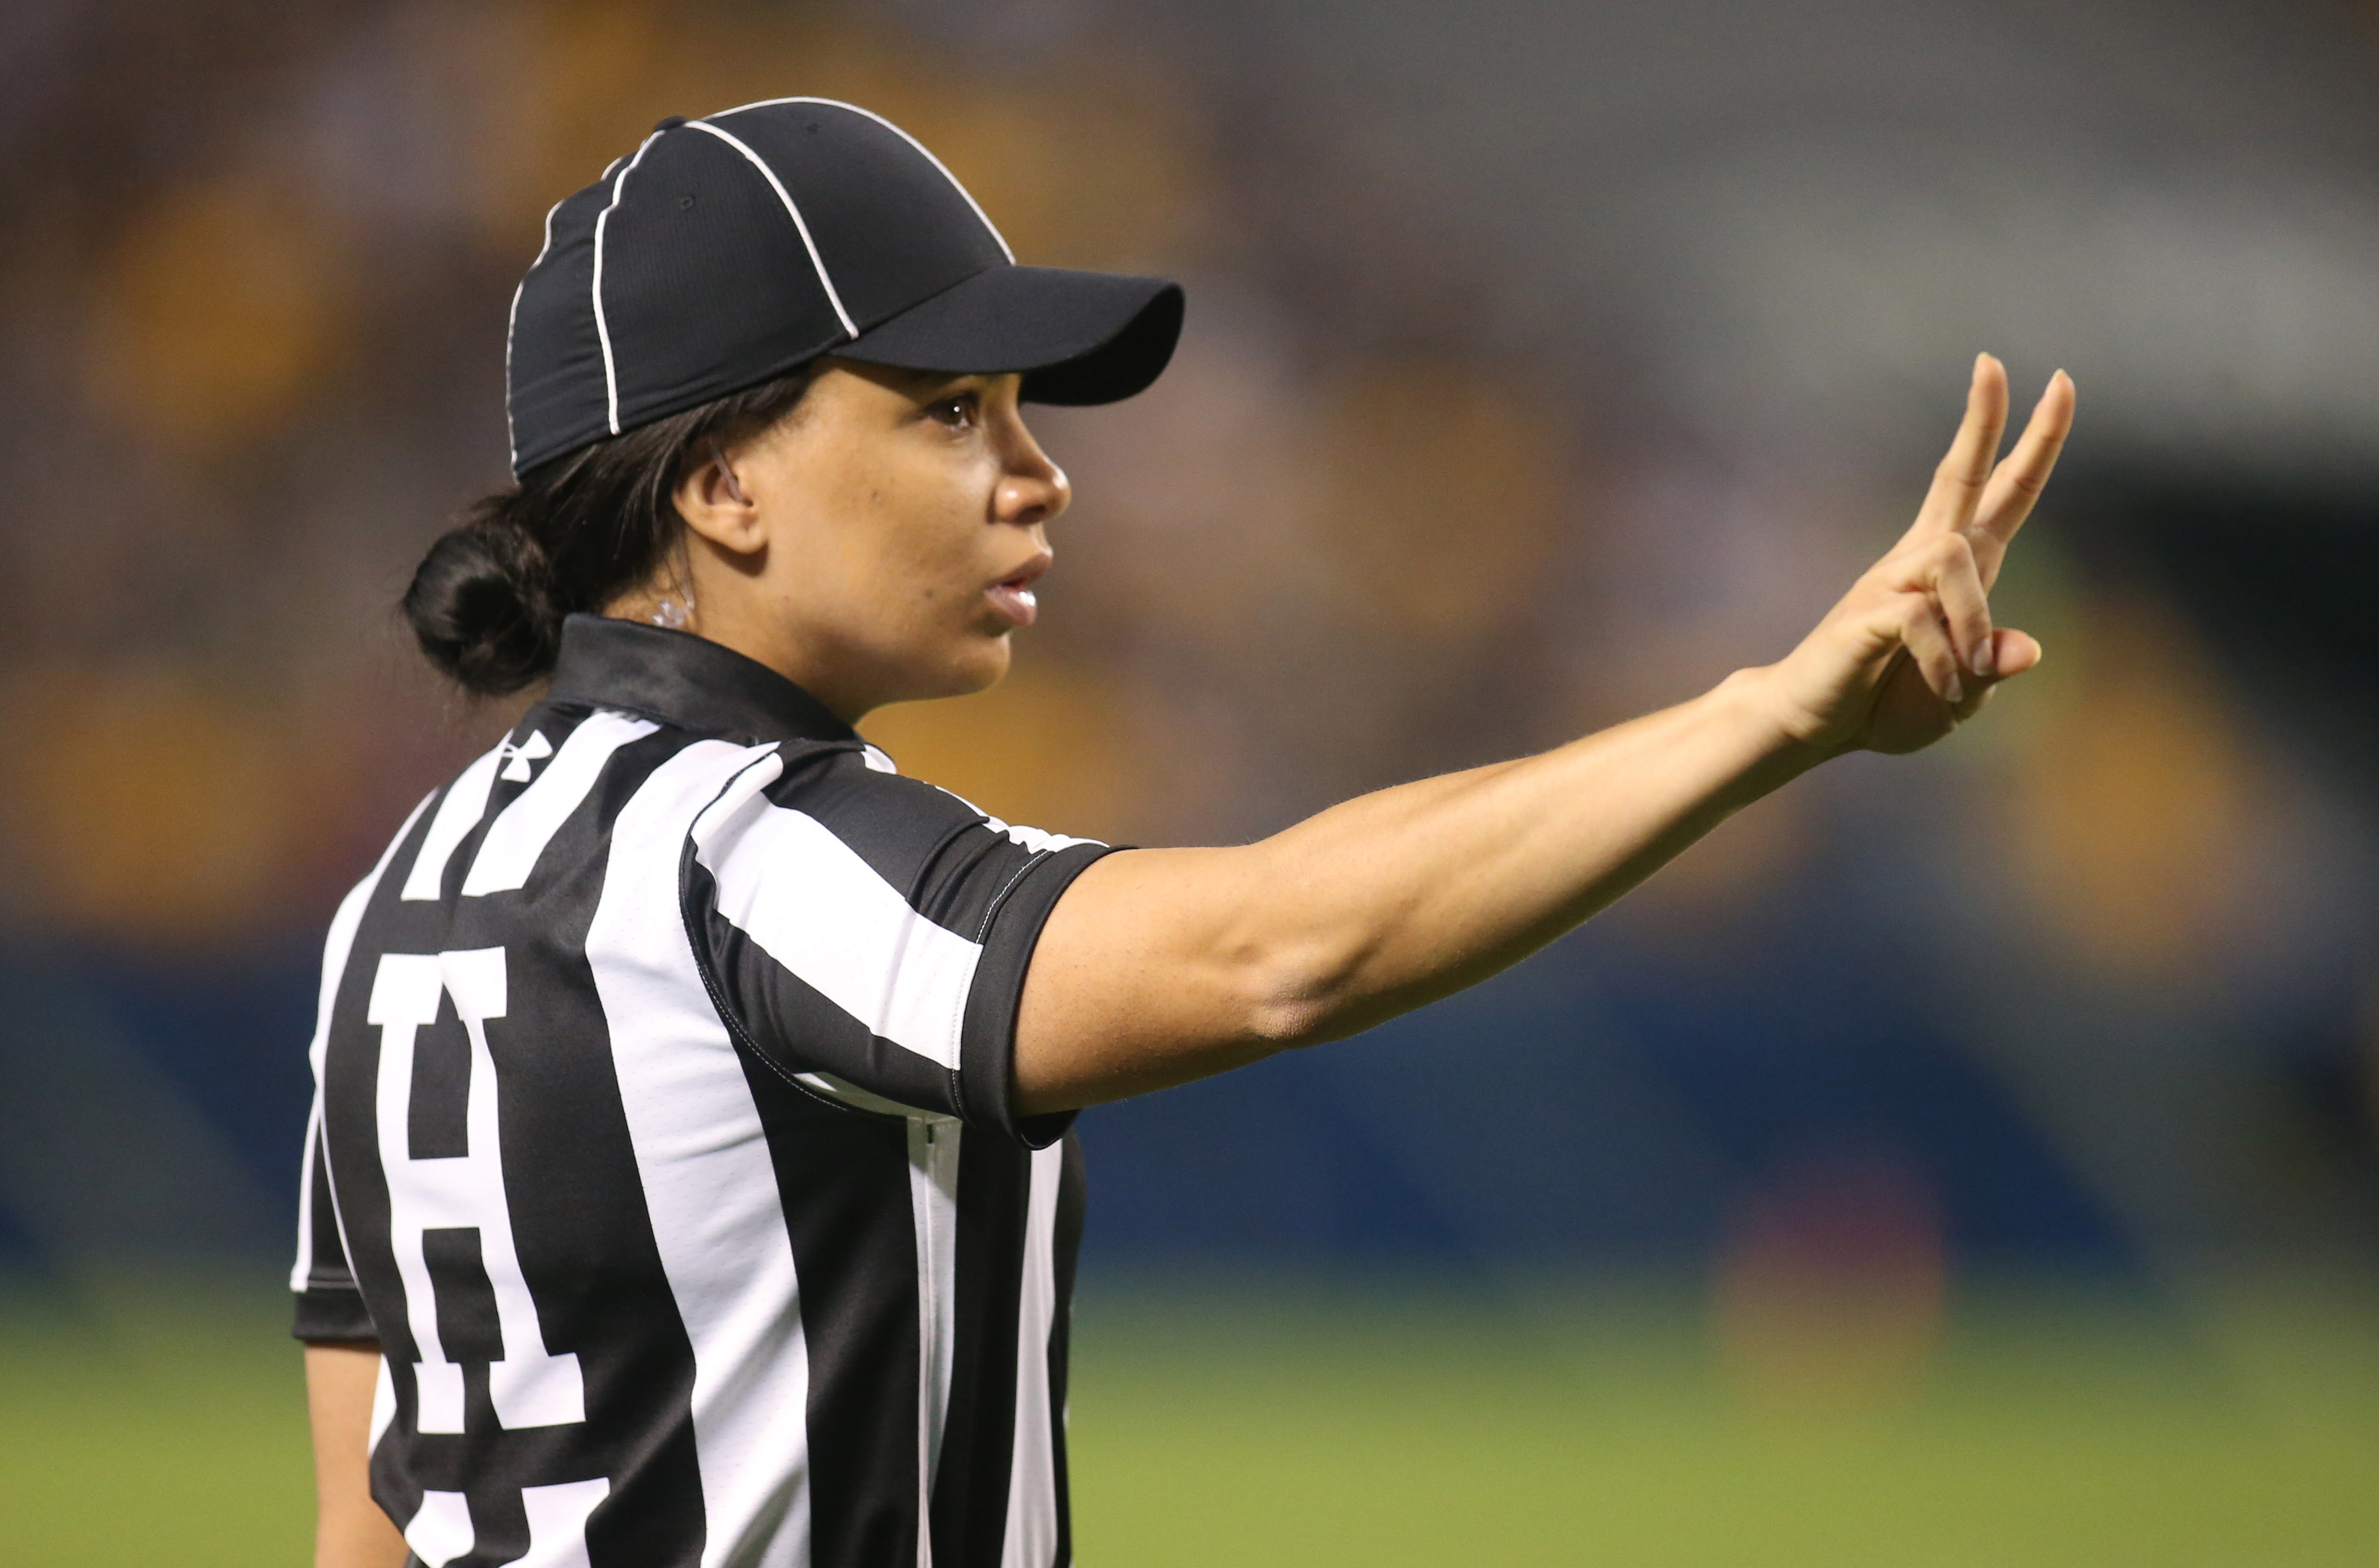 NFL Hires Maia Chaka to Be Its First Black Female Official